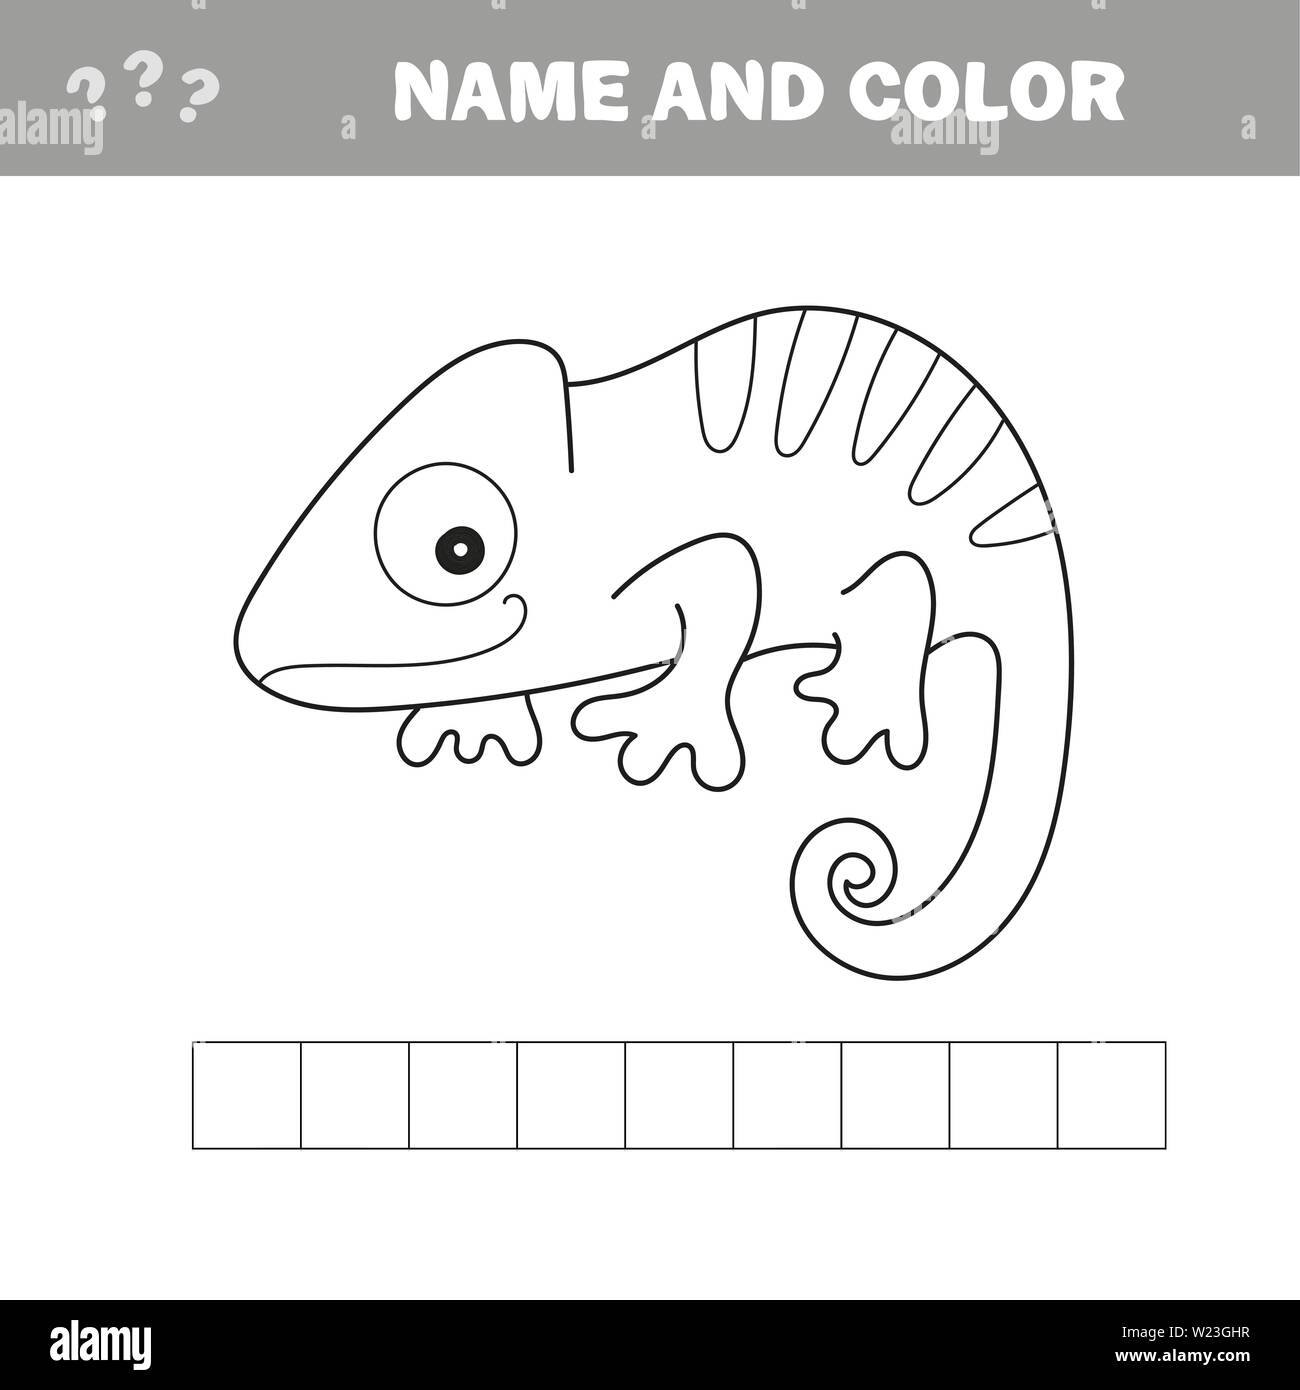 Iguana or chameleon to be colored. Coloring book for children. Visual game. Stock Vector